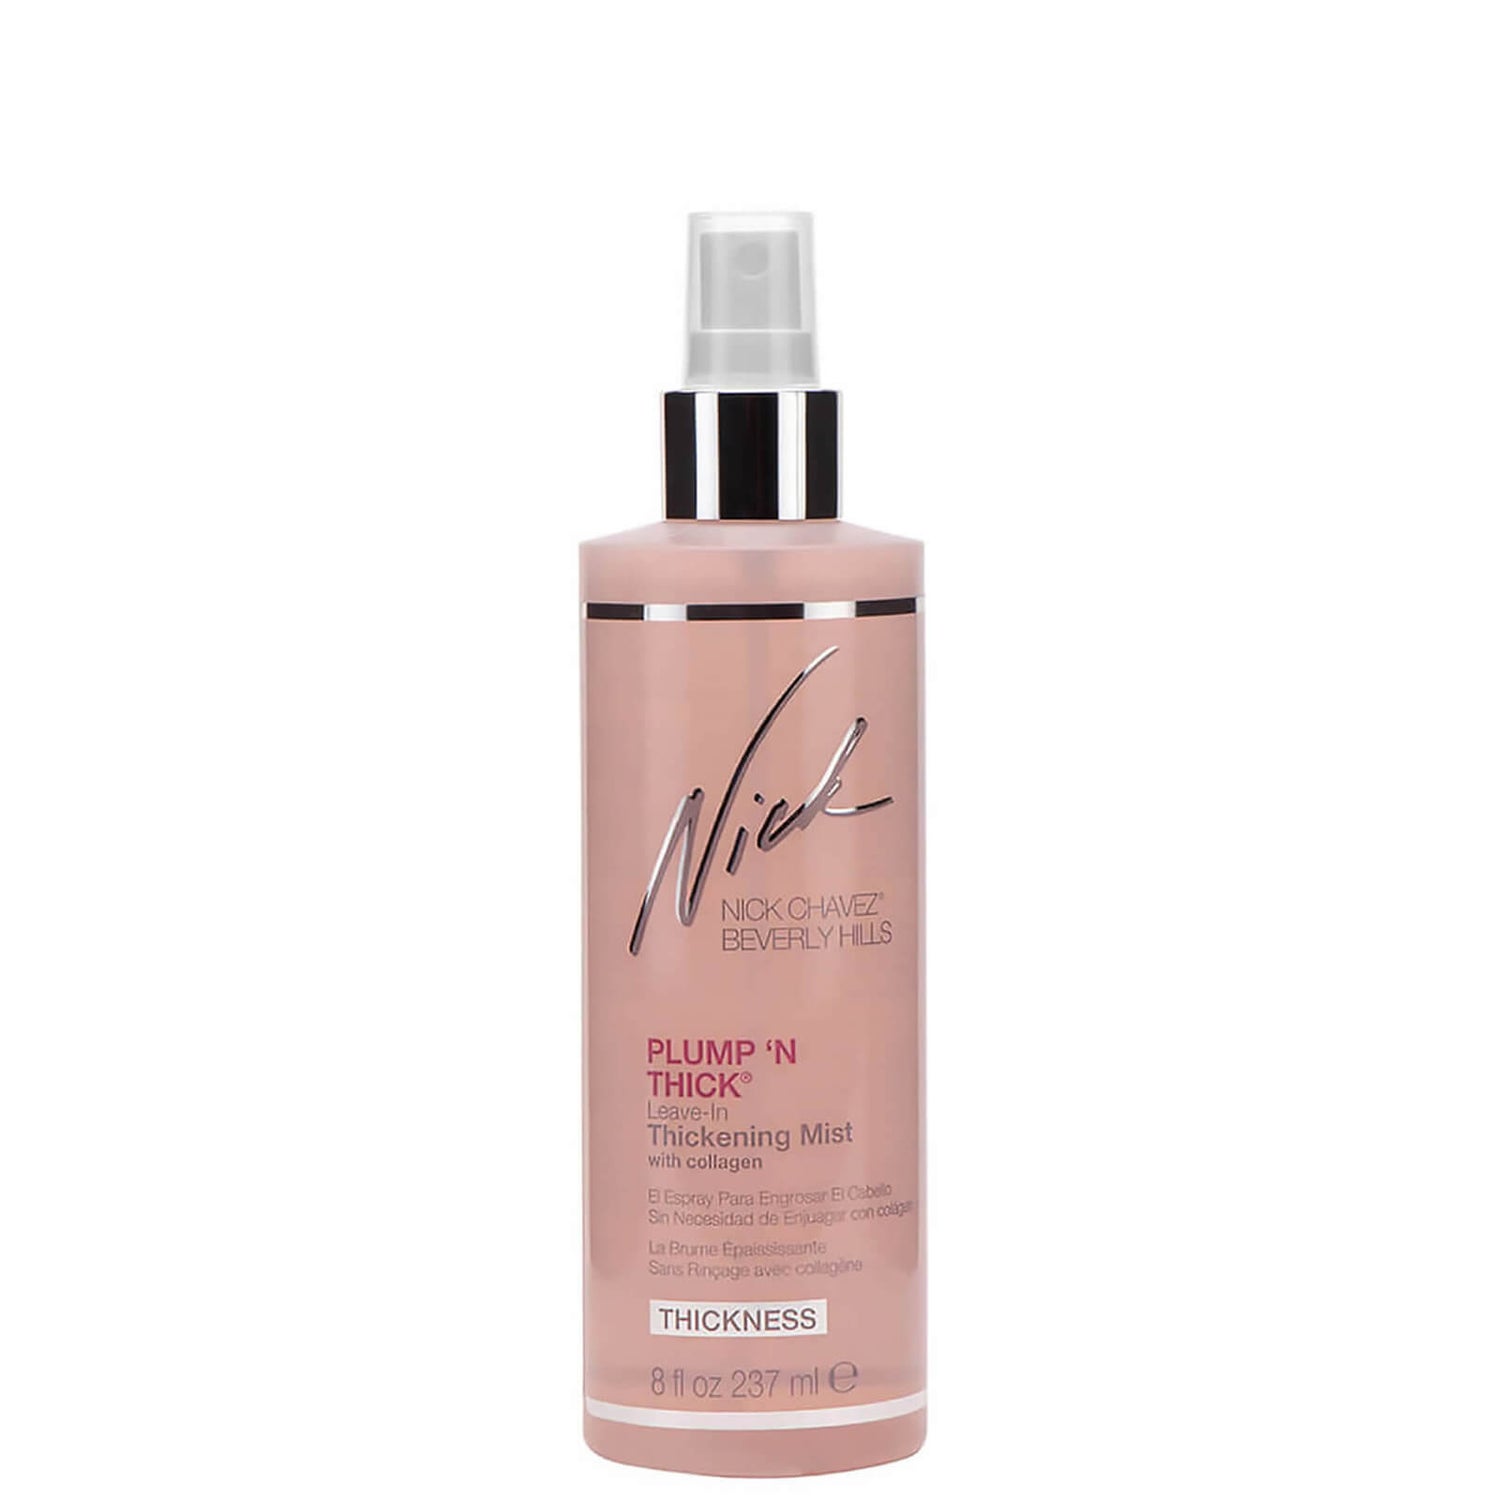 Nick Chavez Beverly Hills Plump 'N Thick Leave-In Thickening Mist (8 fl. oz.)